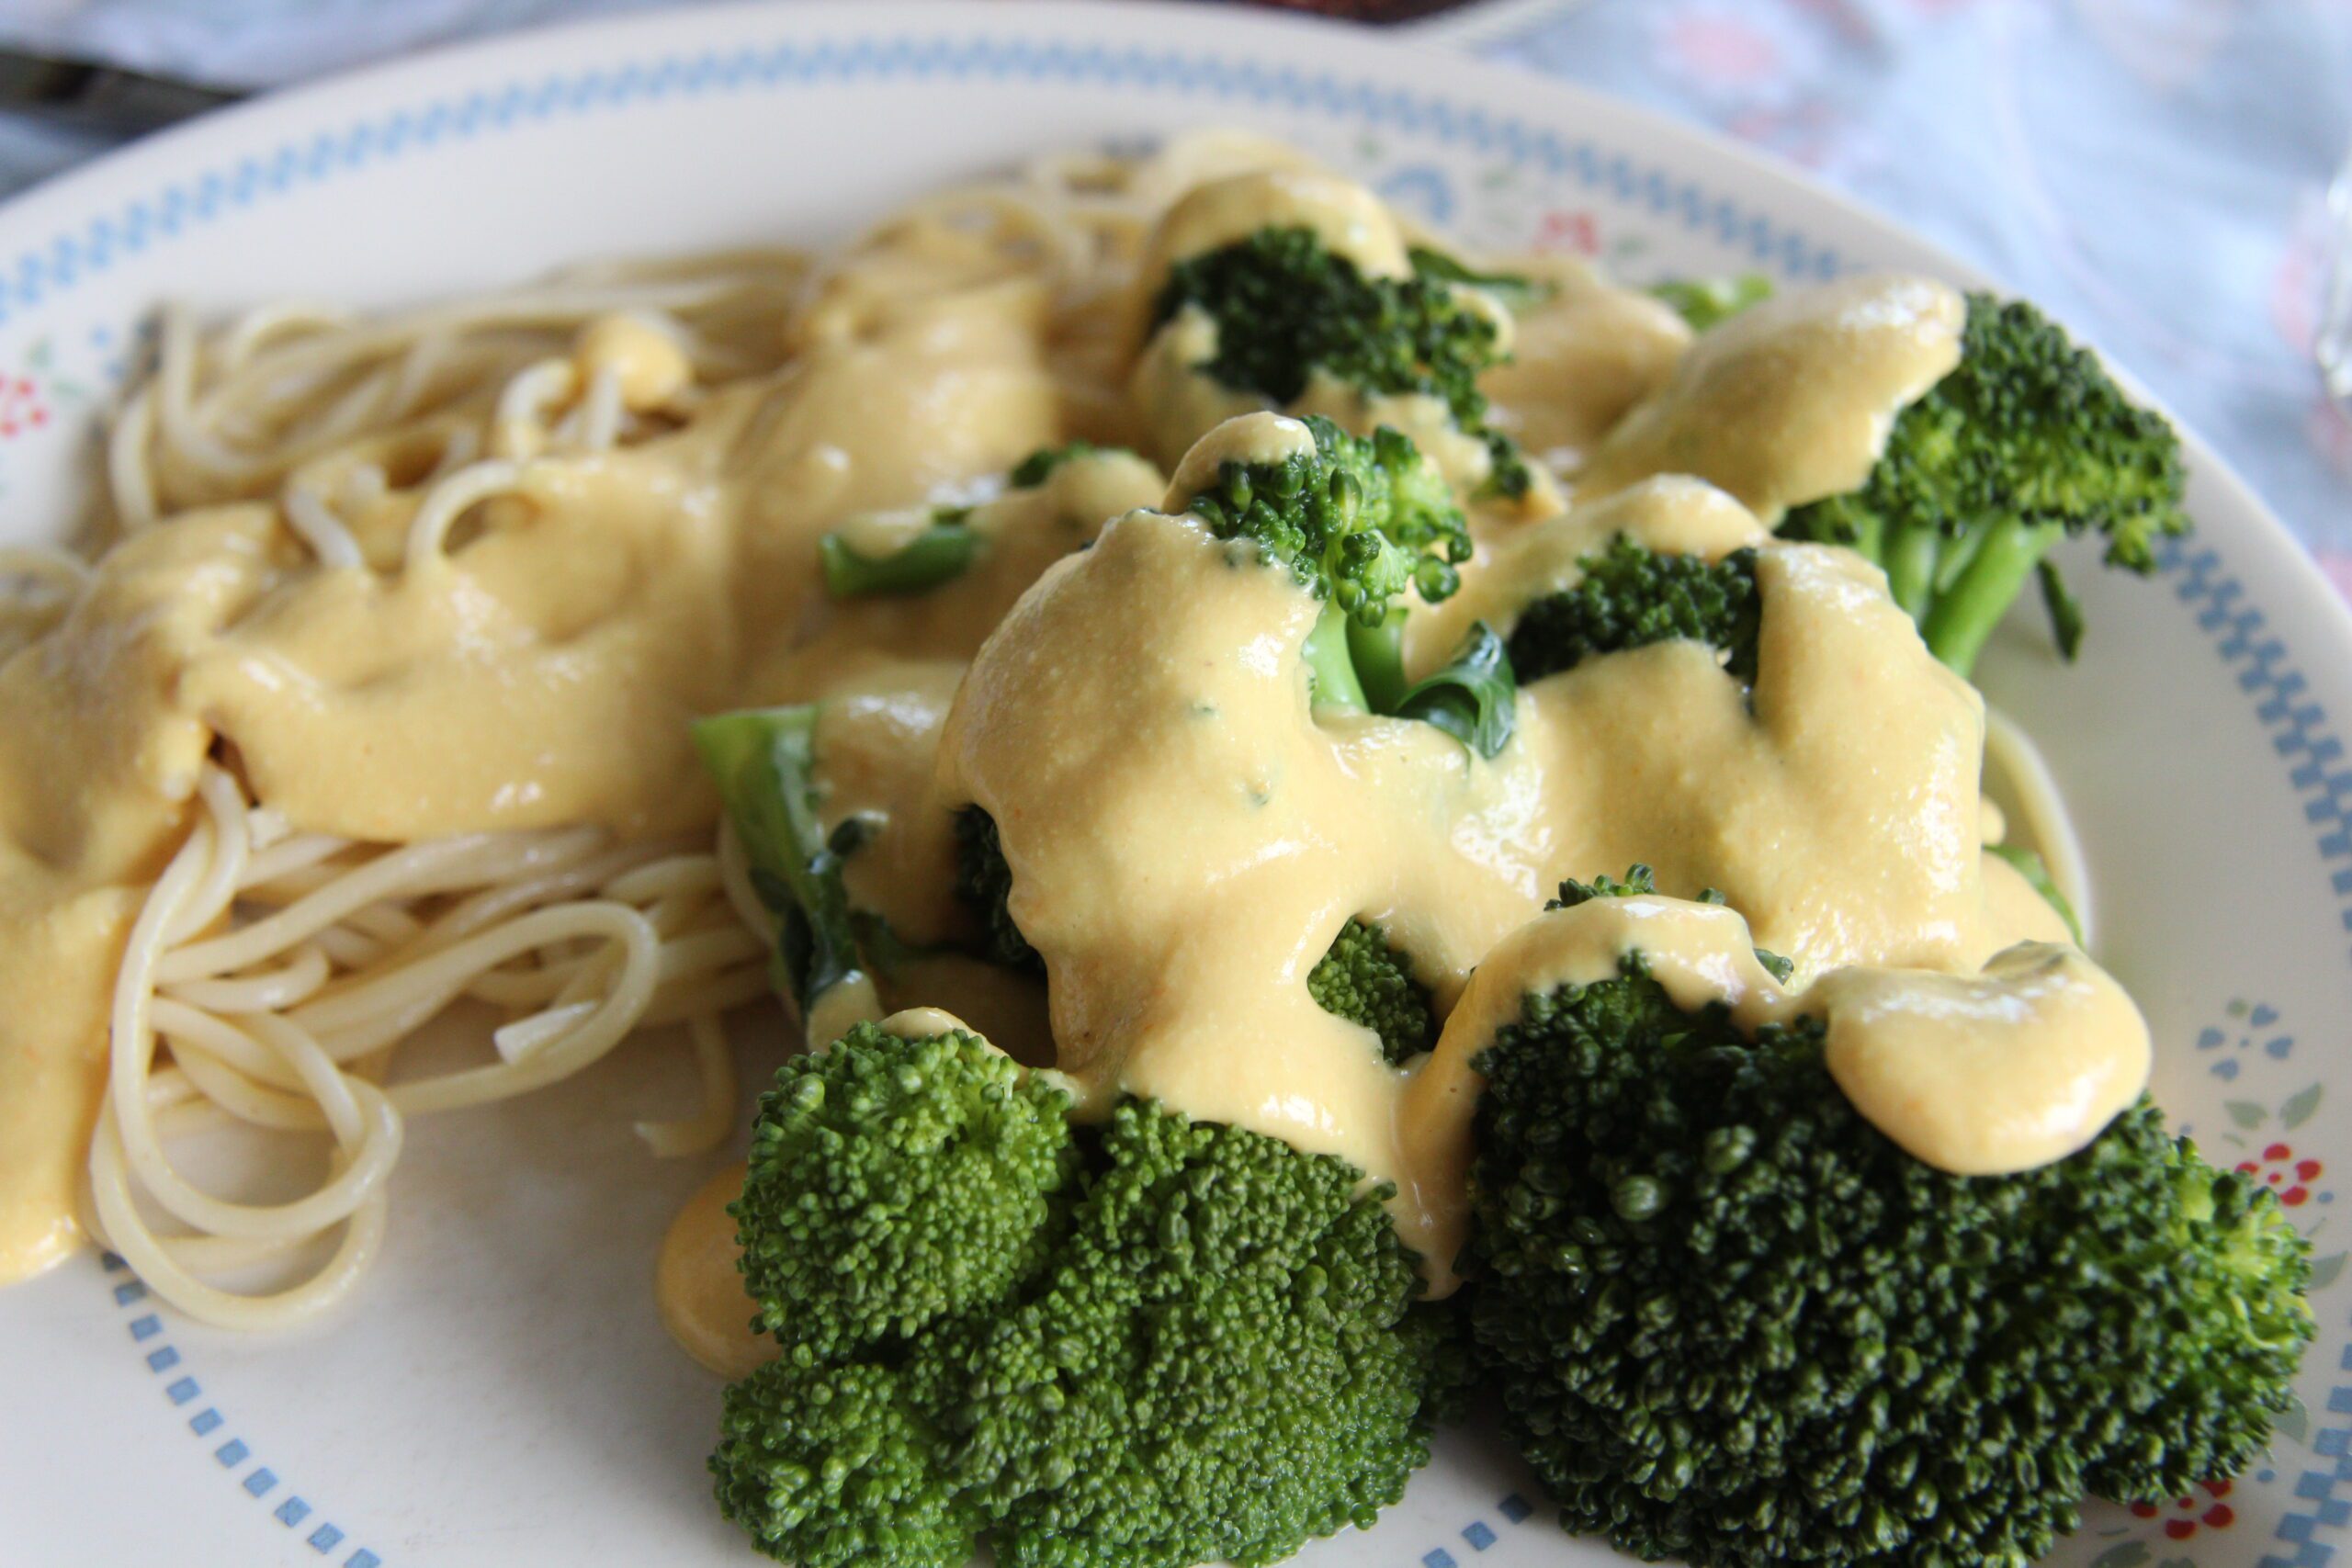 Featured image for “Cashew ‘Cheese’ Sauce with Steamed Broccoli”